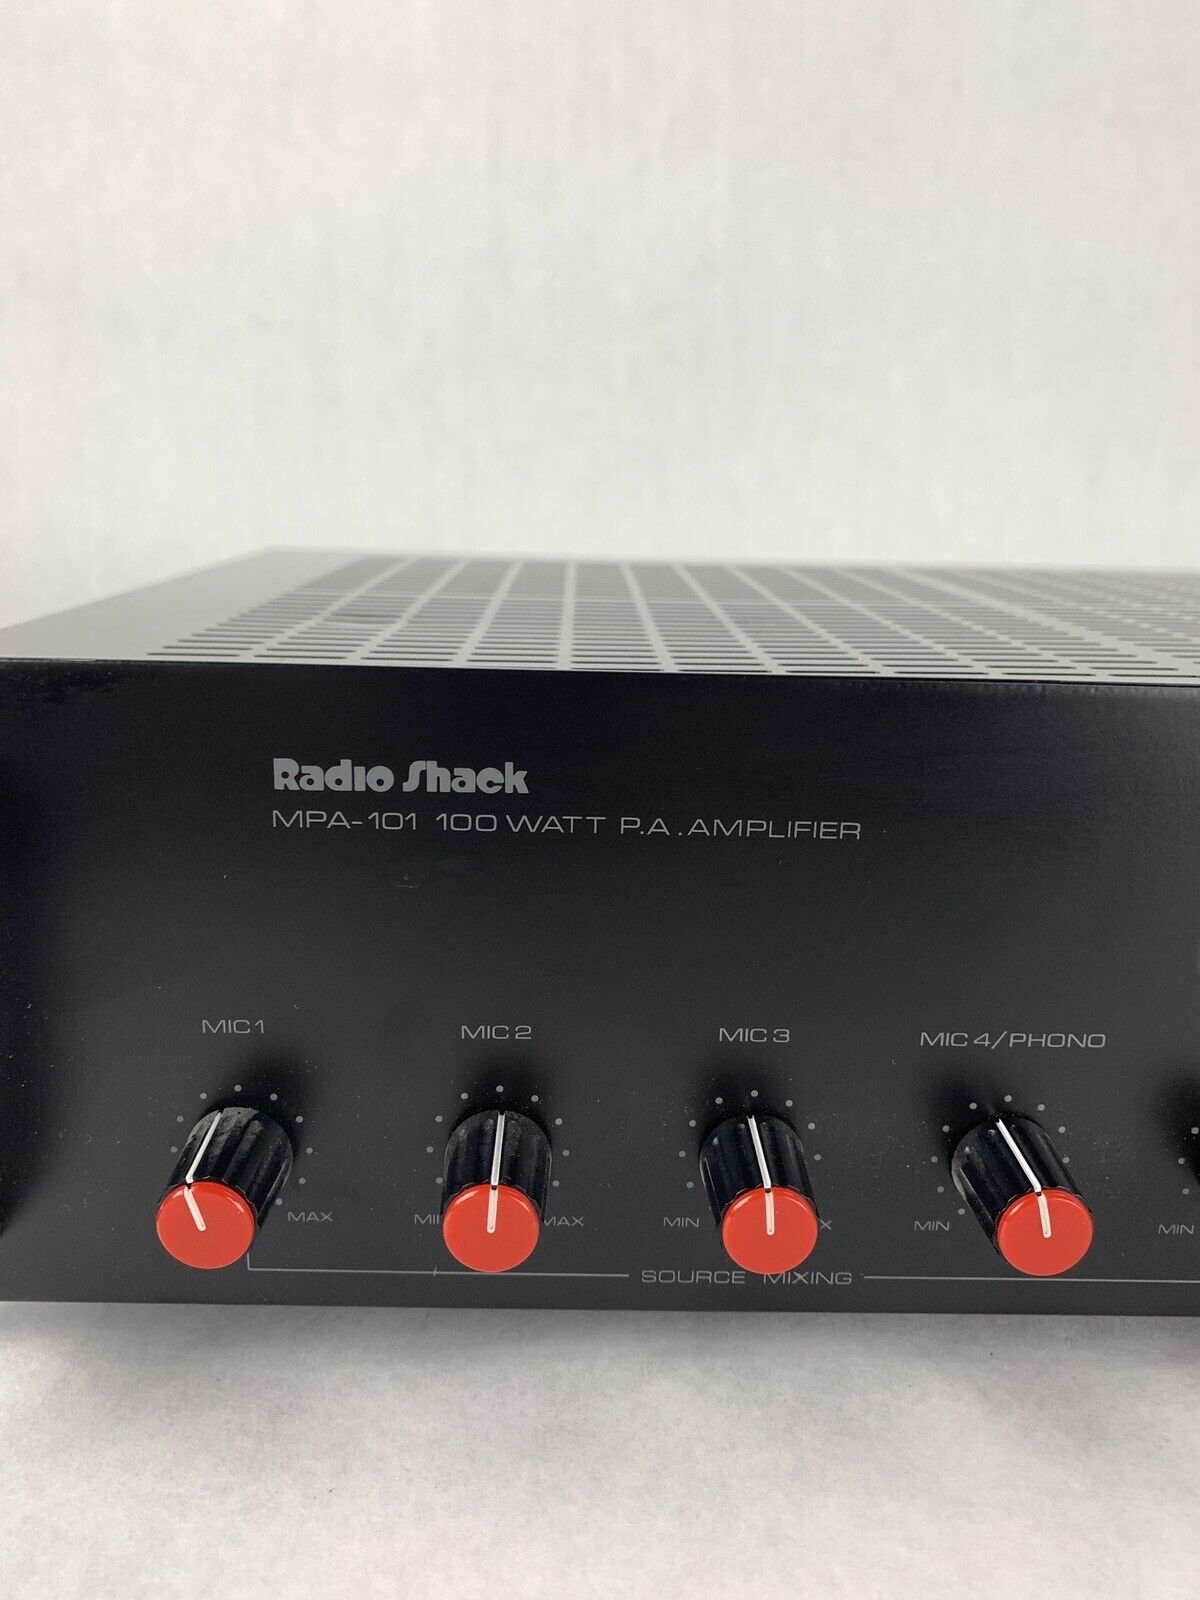 Radio Shack MPA-101 PA Audio Amplifier Working with One Bad Mic Jack